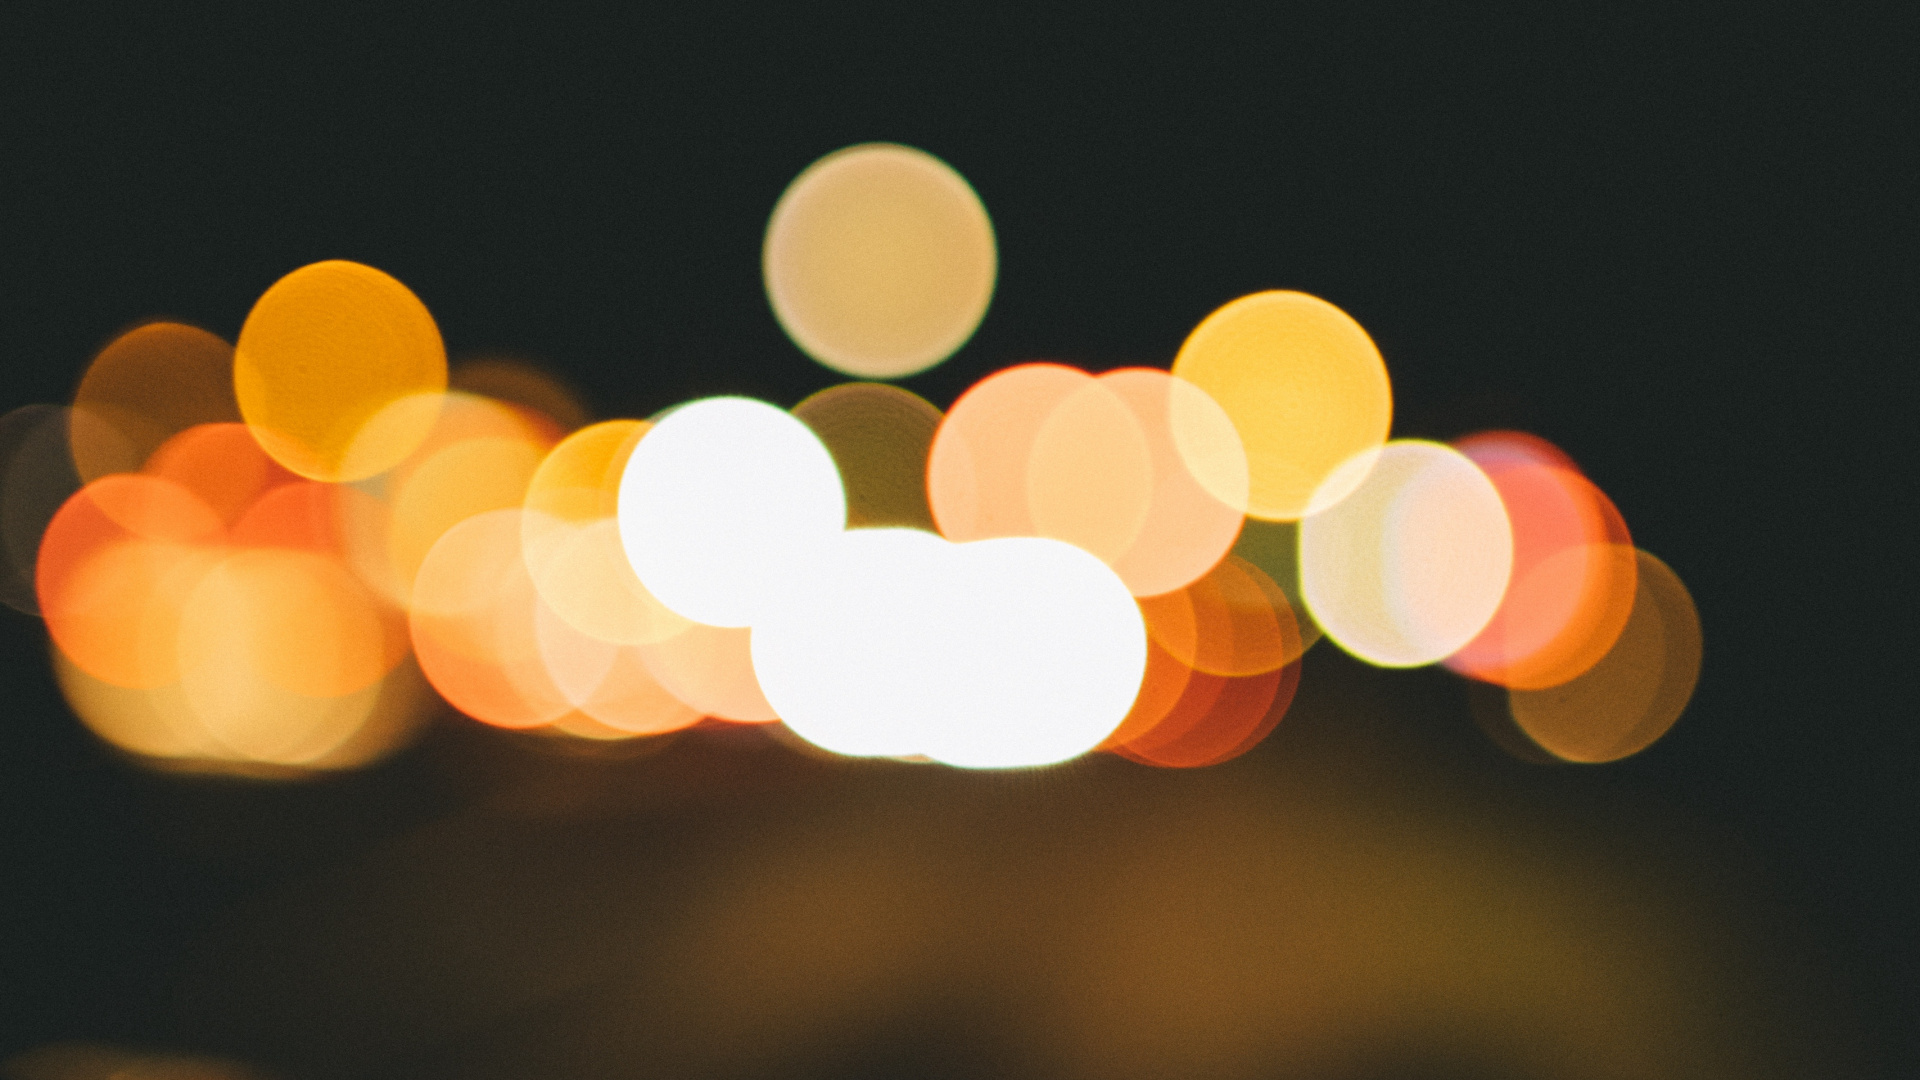 Bokeh Photography of Yellow Lights. Wallpaper in 1920x1080 Resolution